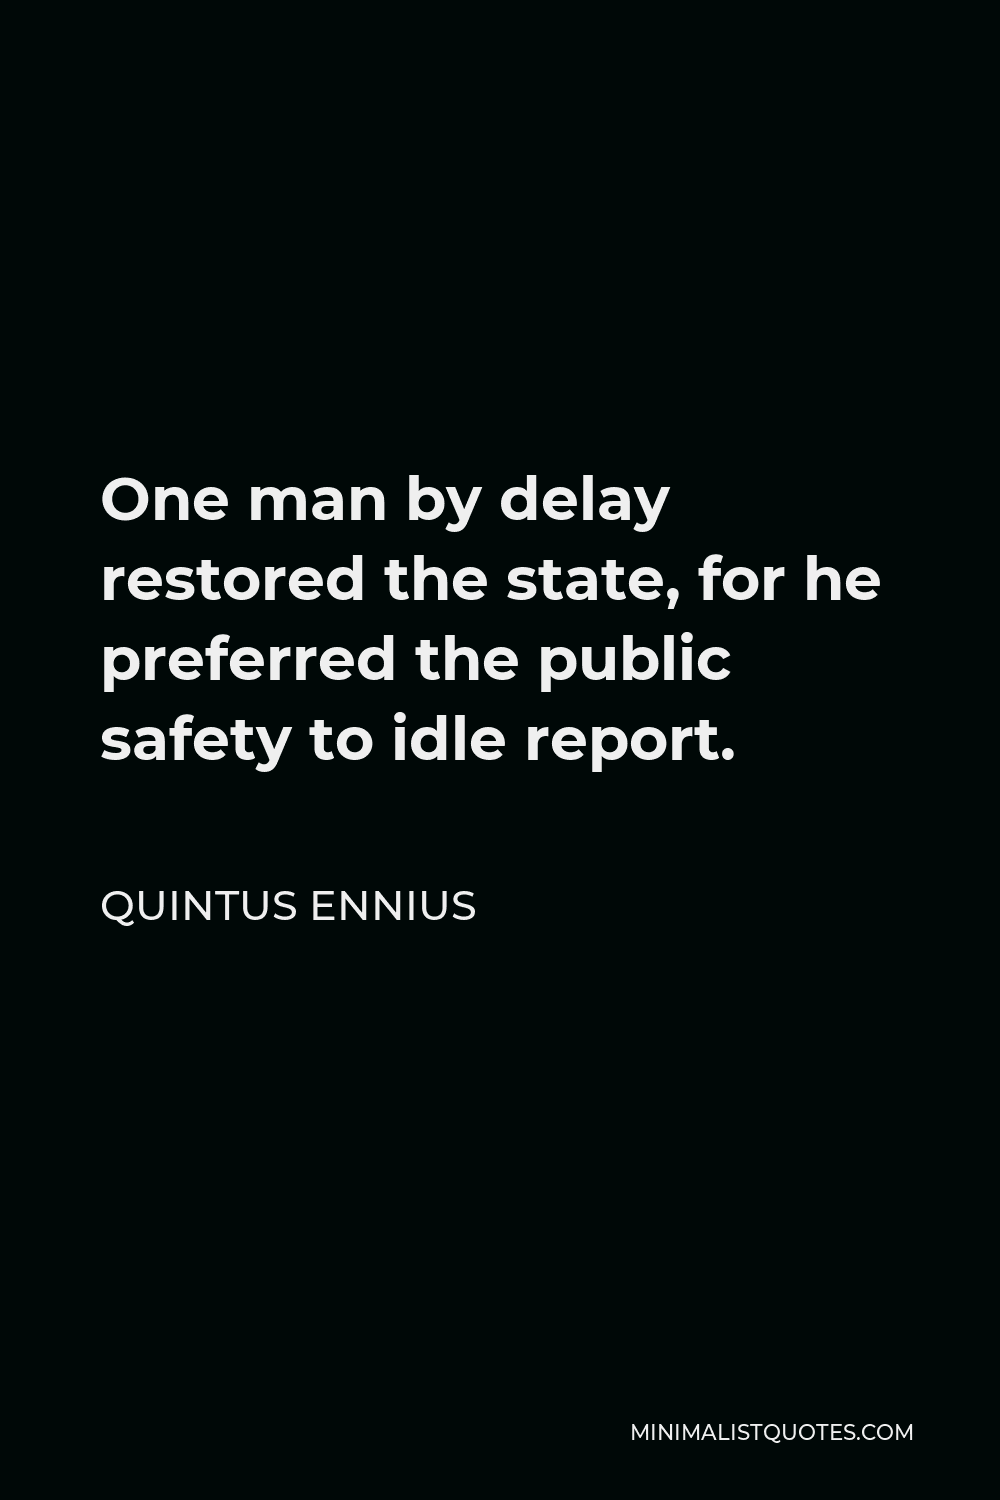 Quintus Ennius Quote - One man by delay restored the state, for he preferred the public safety to idle report.